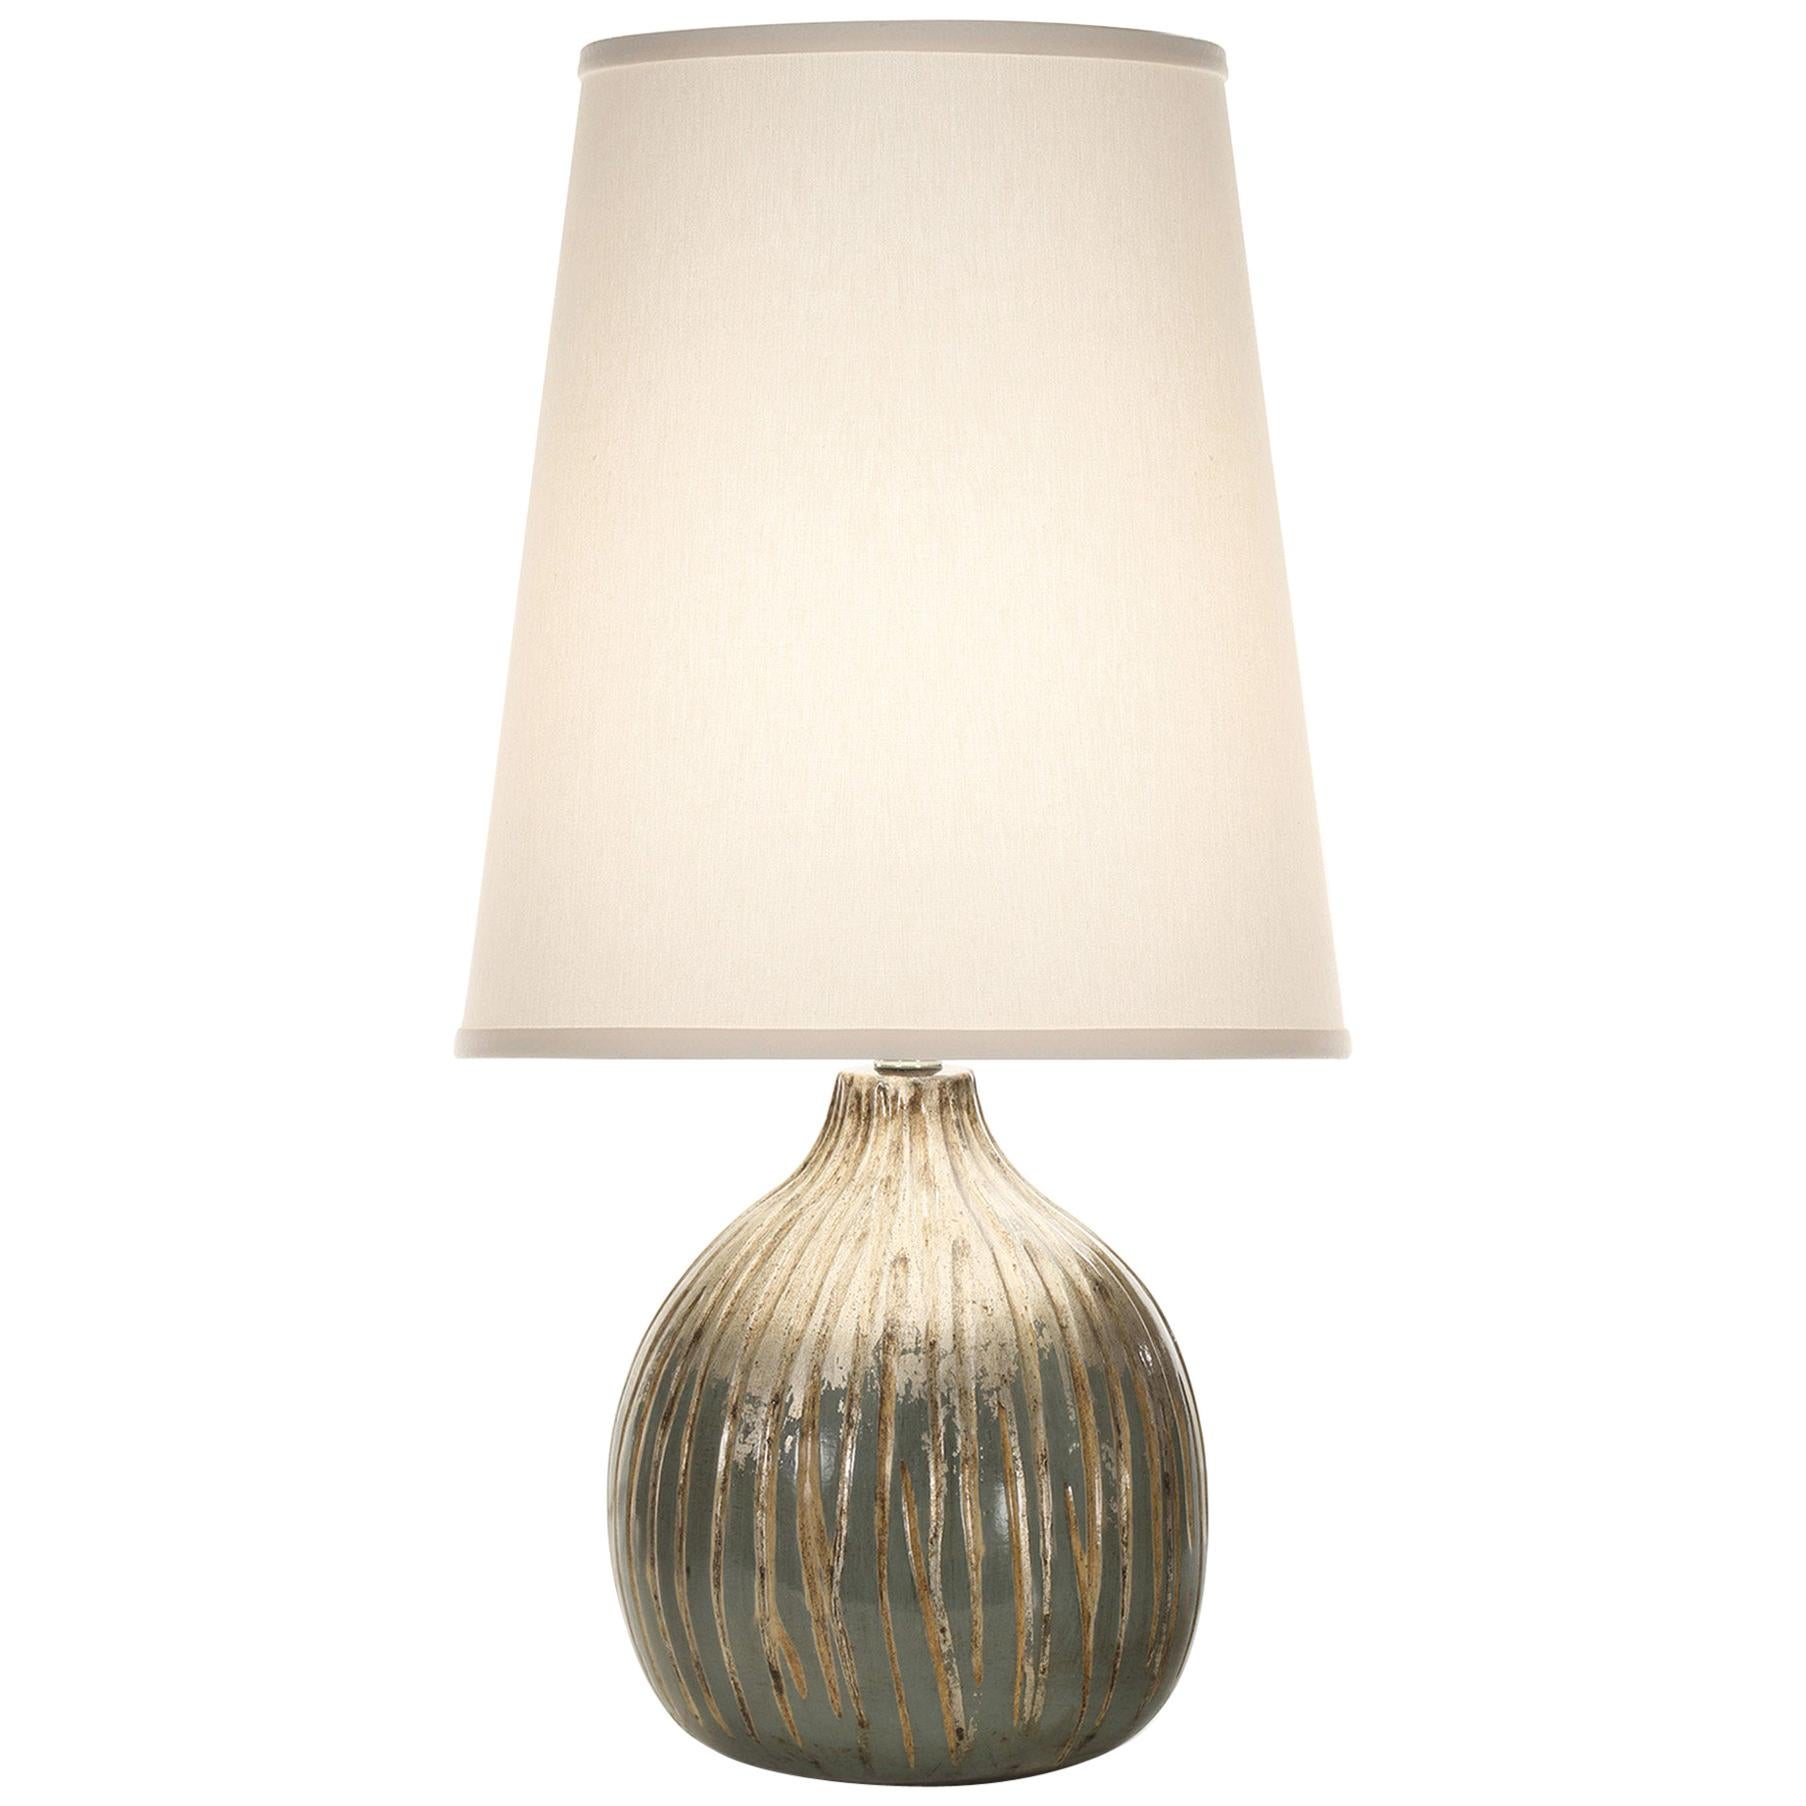 Lillian Table Lamp in Silver and Blue by CuratedKravet